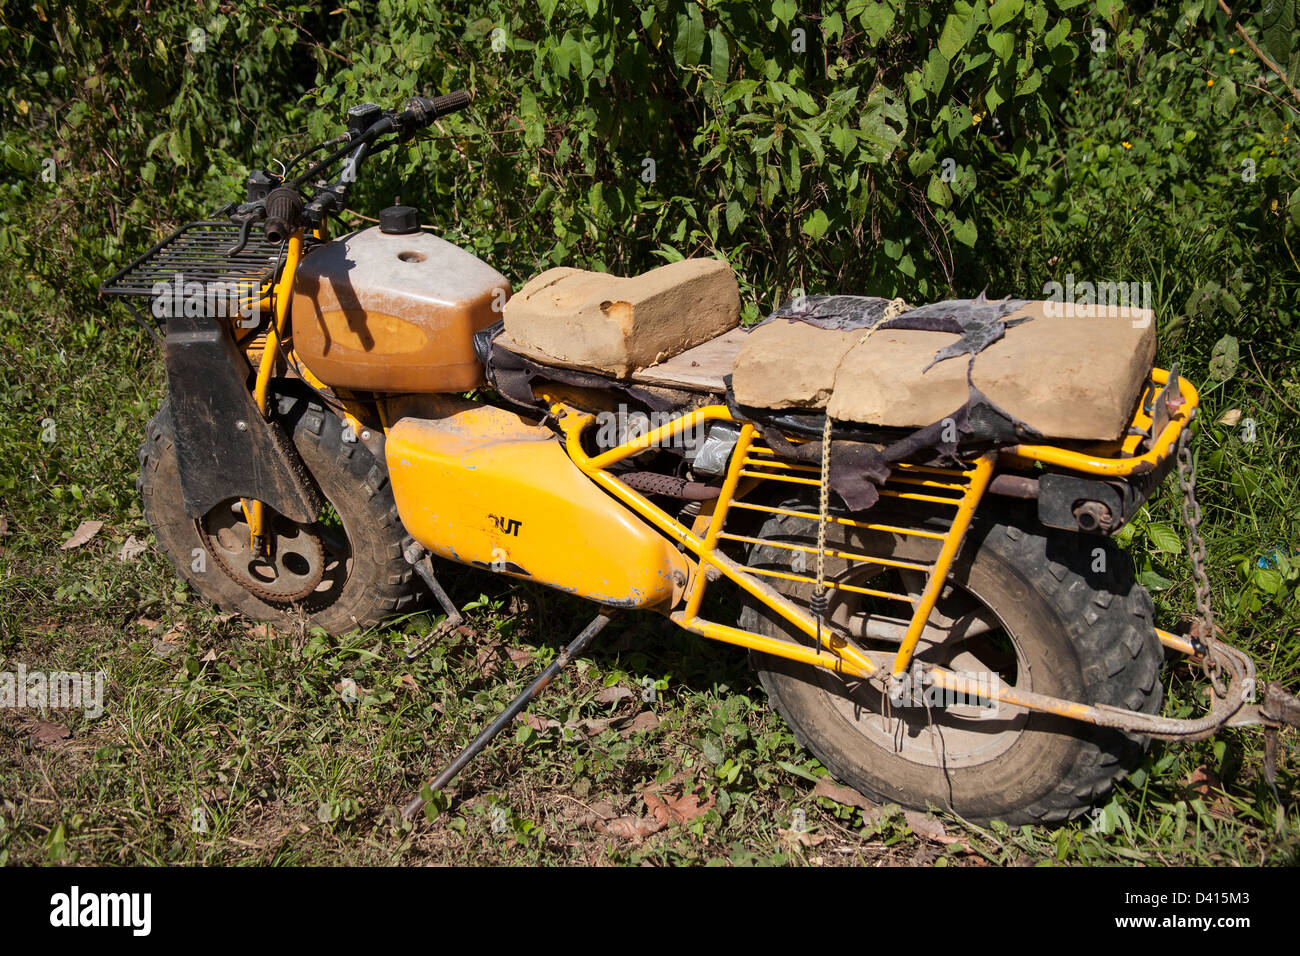 Old, used and small motorcycle with knobby tires. Stock Photo